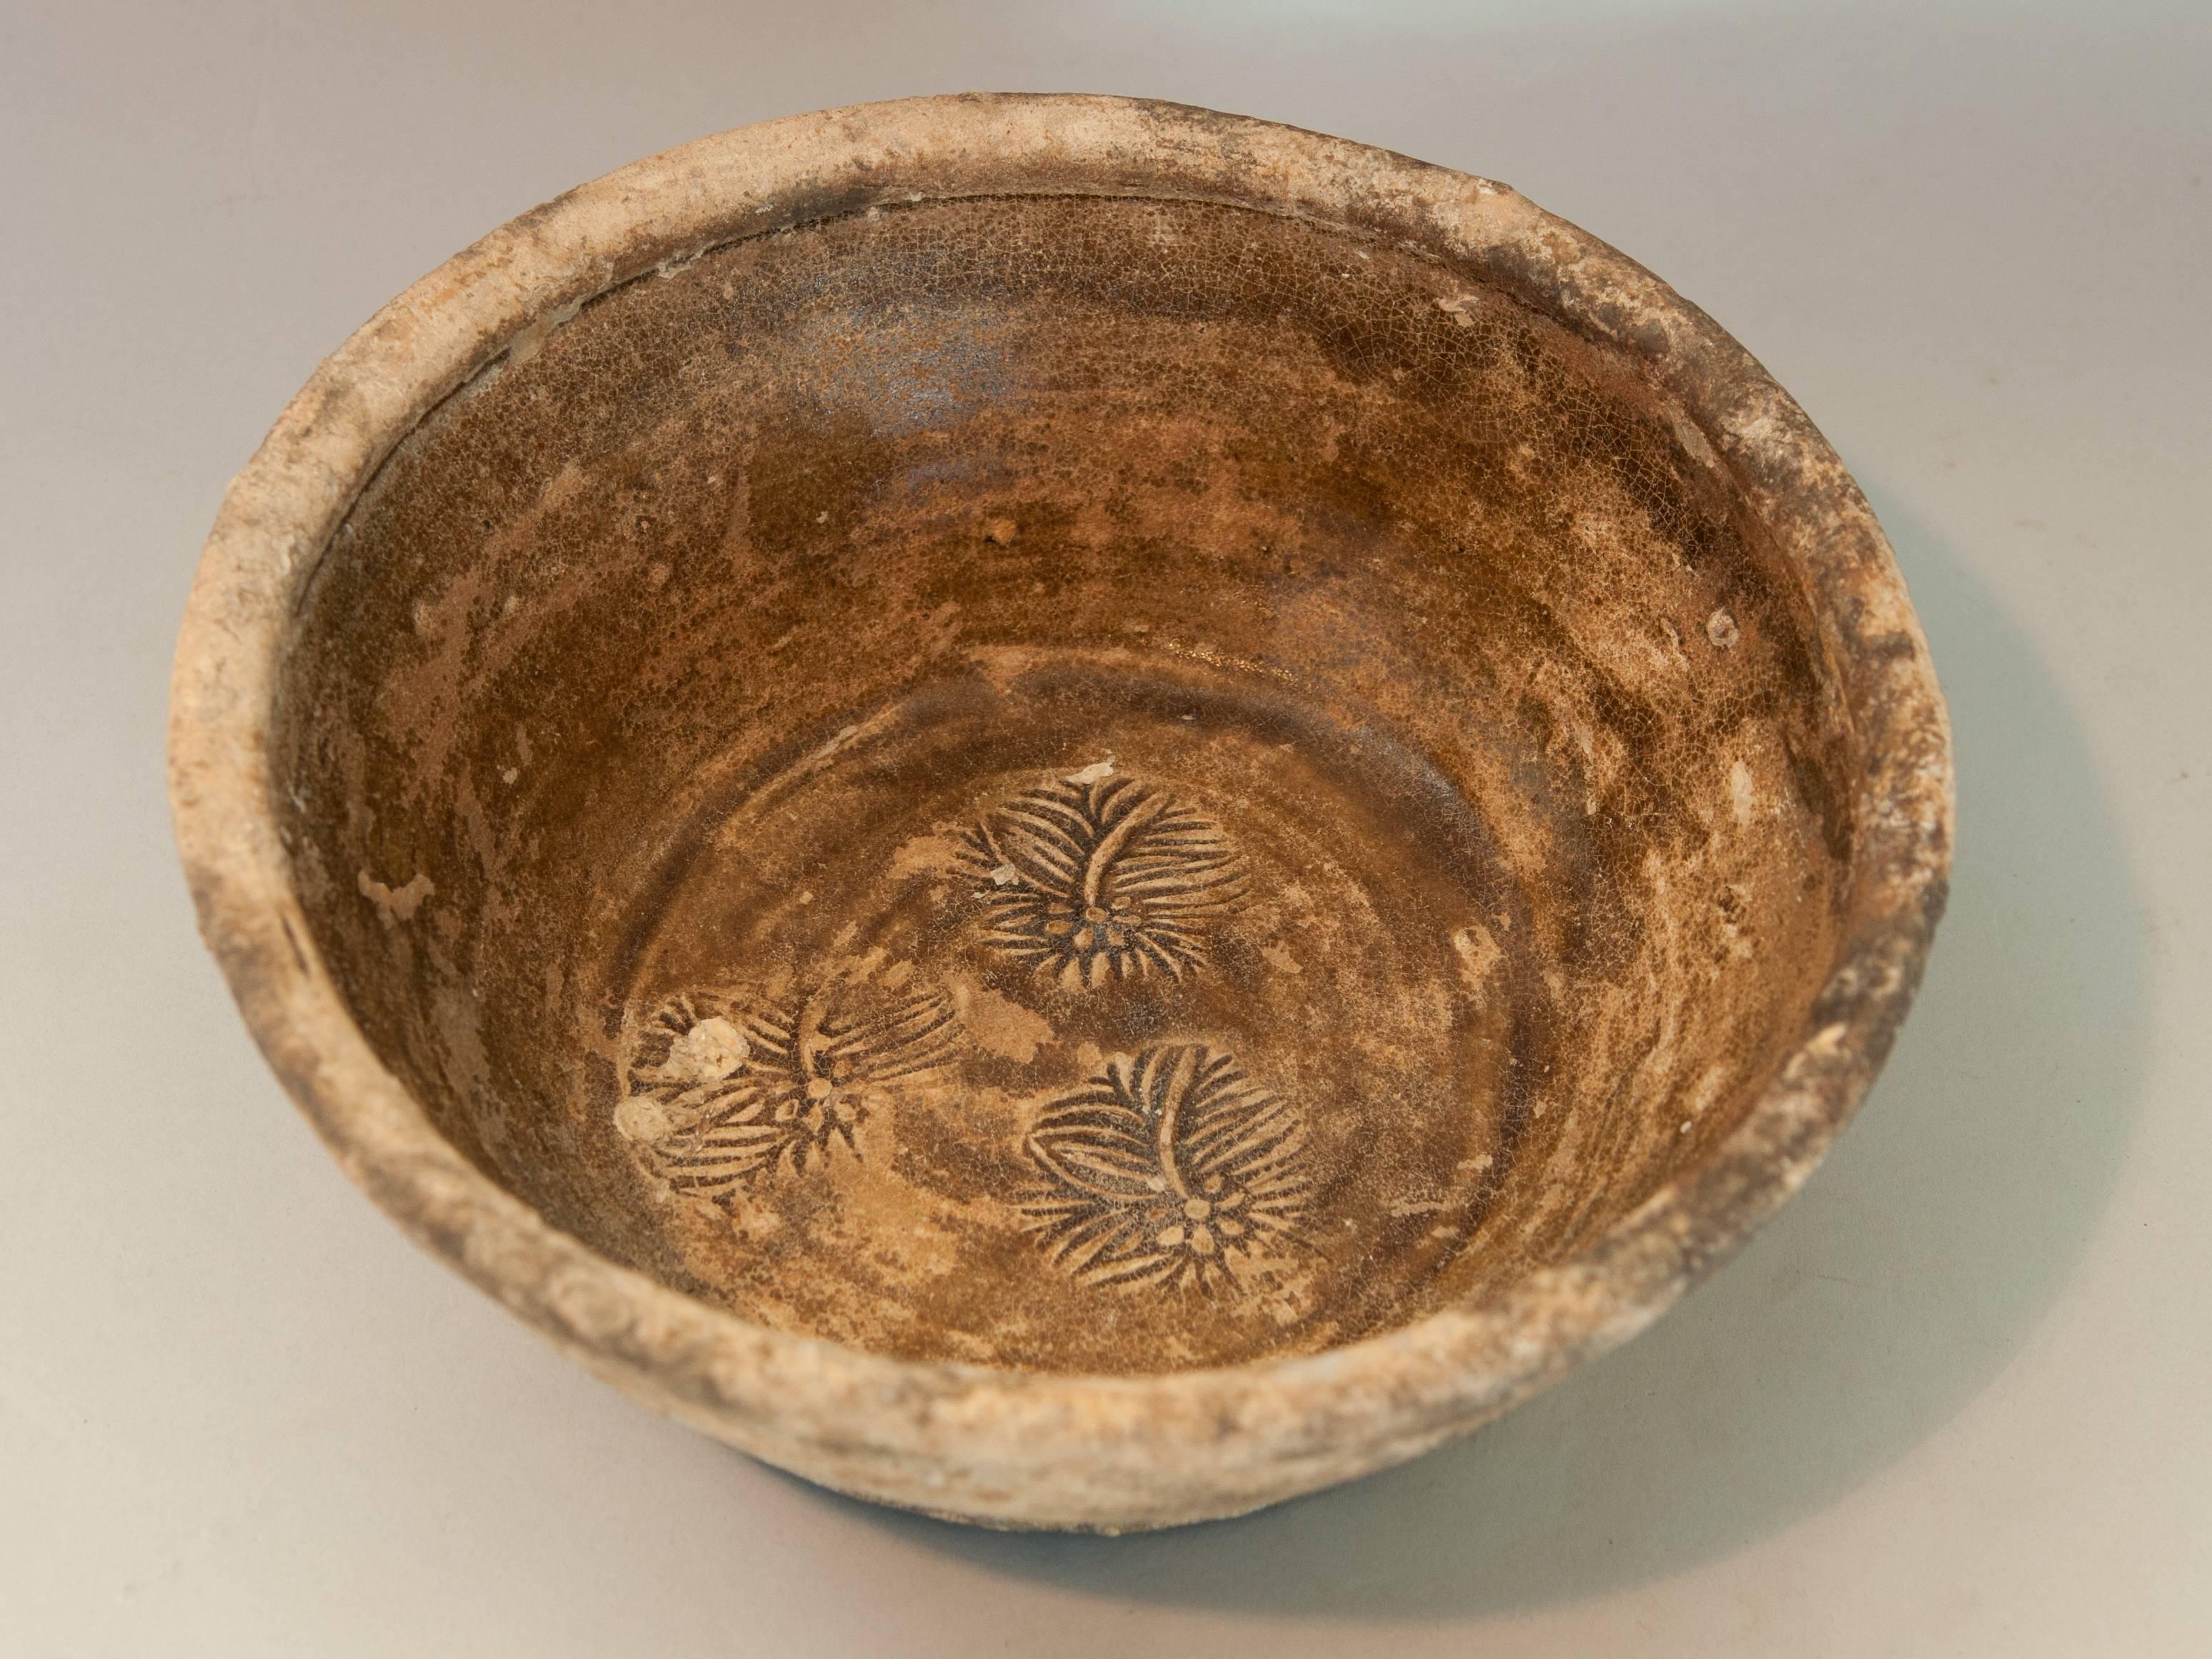 Hand-Crafted Brown Glazed Ceramic Bowl Song Dynasty Salvaged off the North Coast of Java